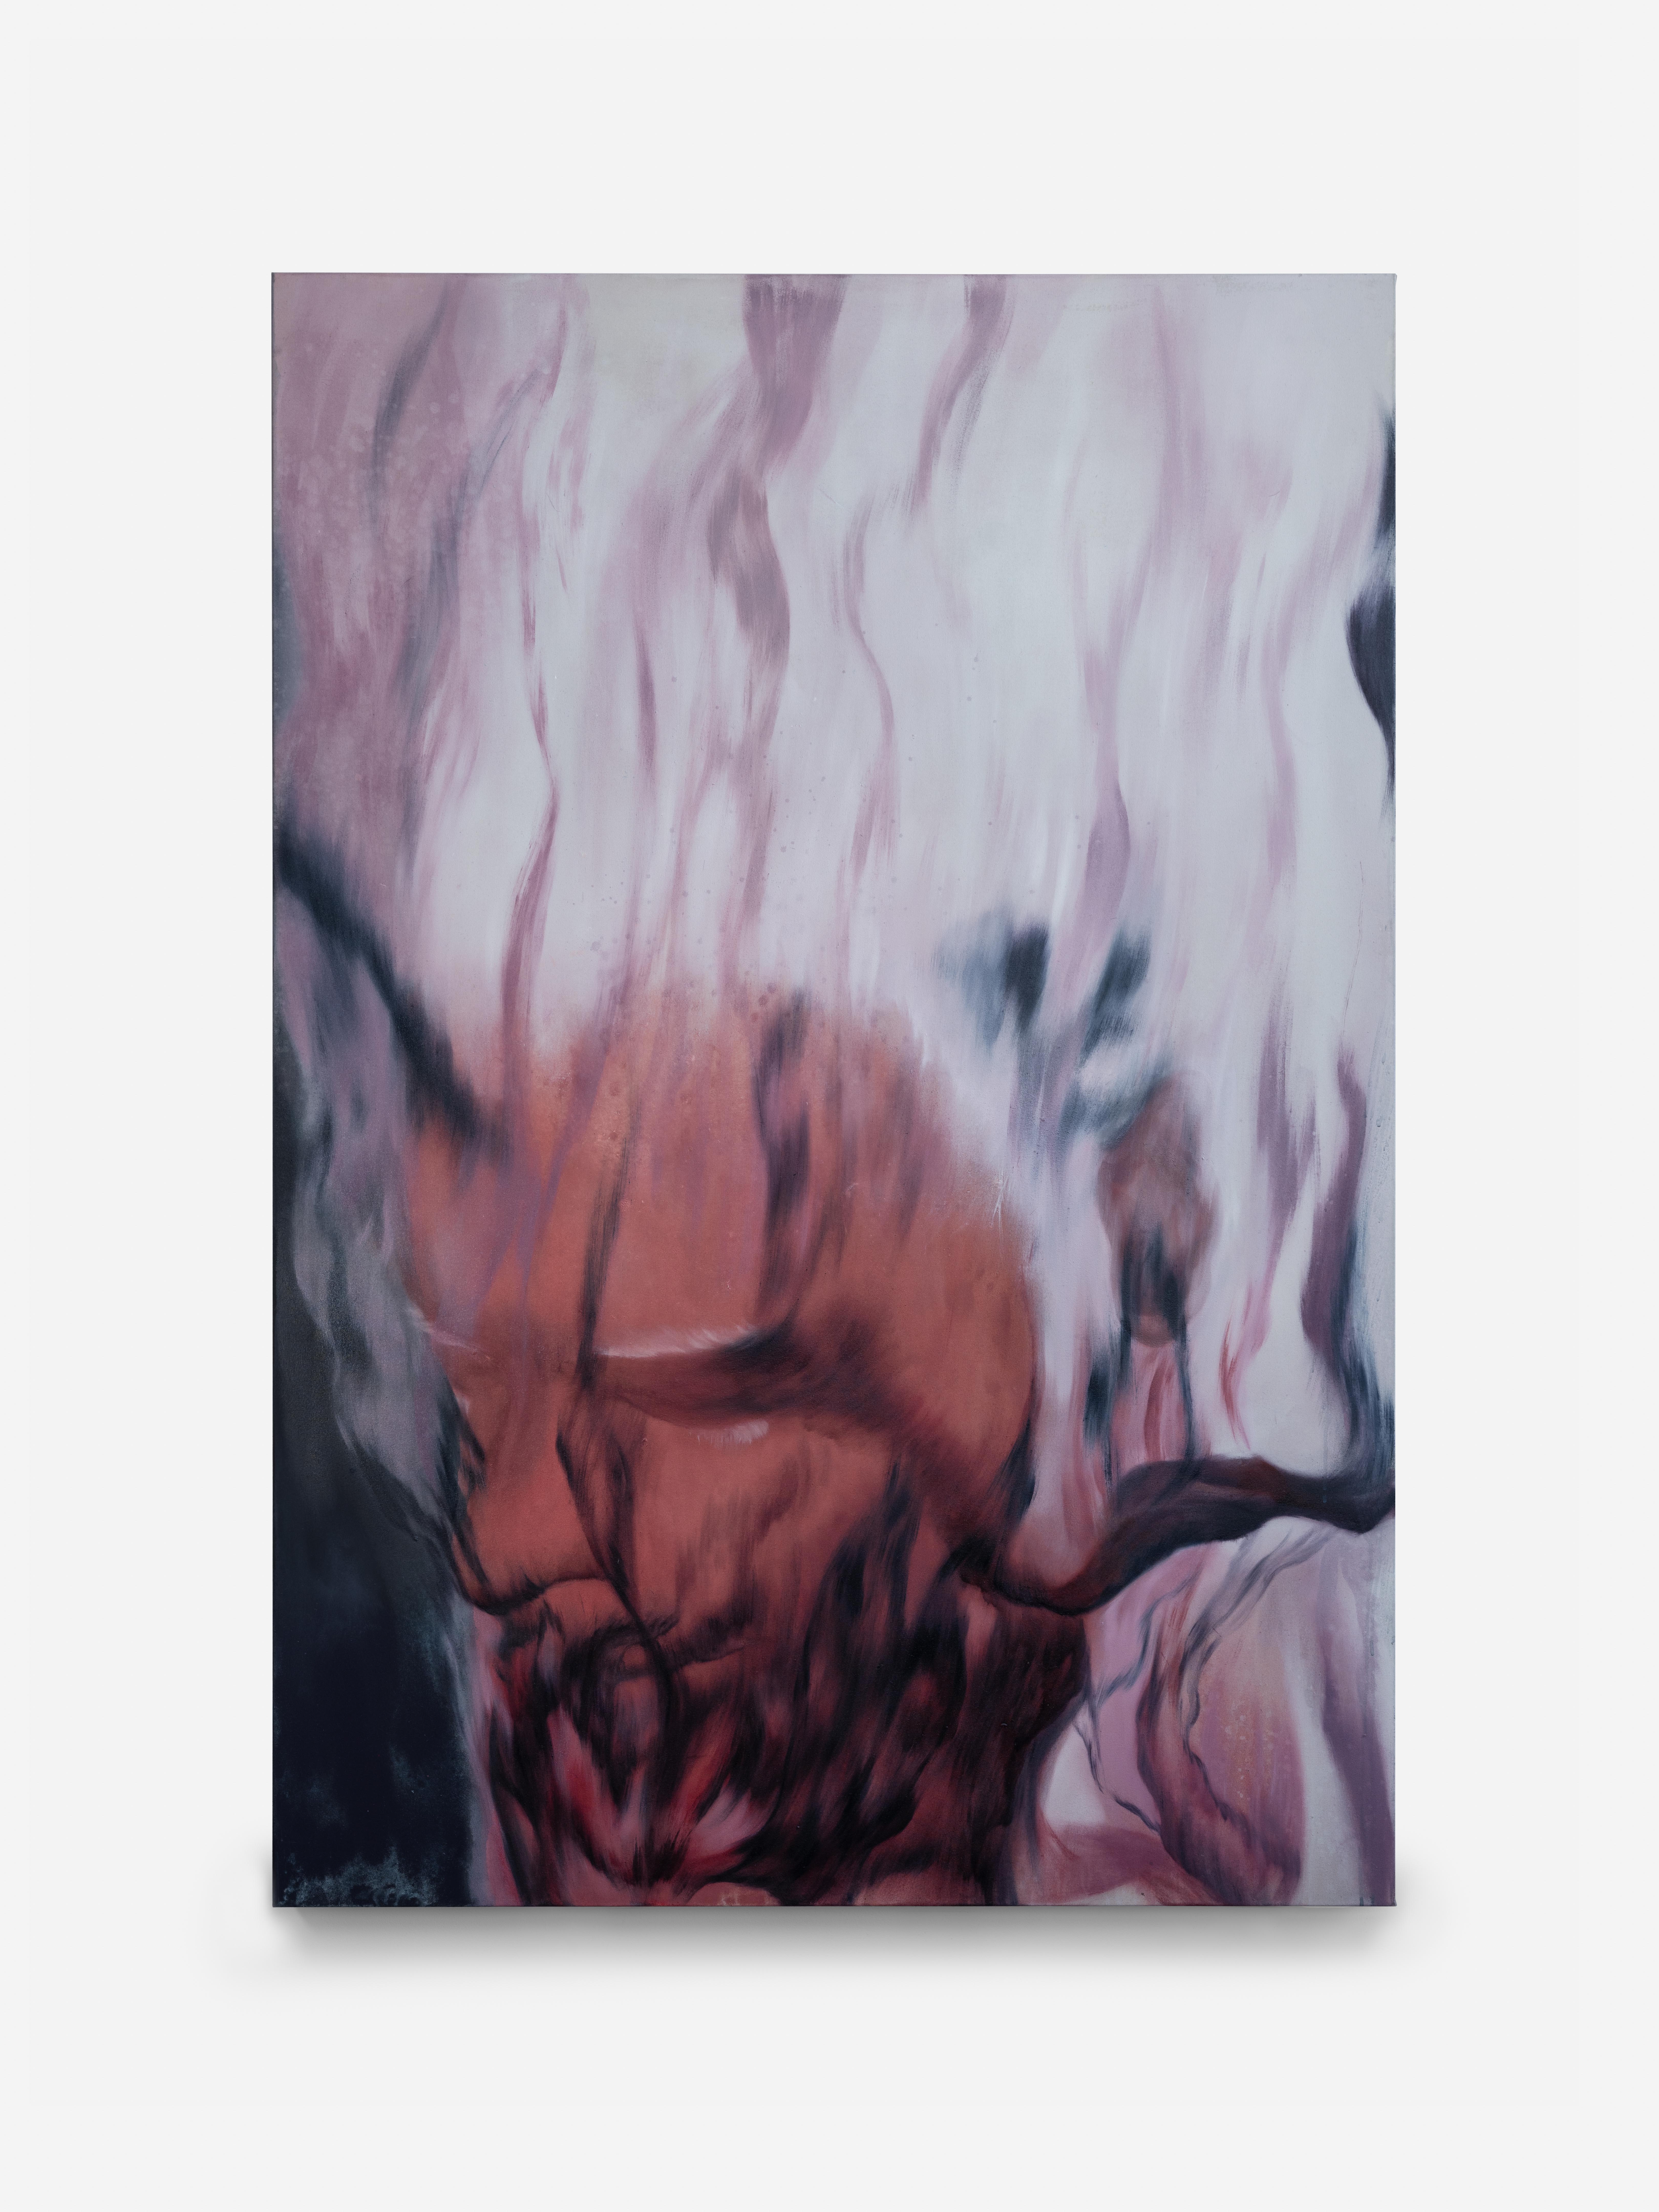 Dust to dust 尘归尘160x110cm pigment,oil on canvas 2023